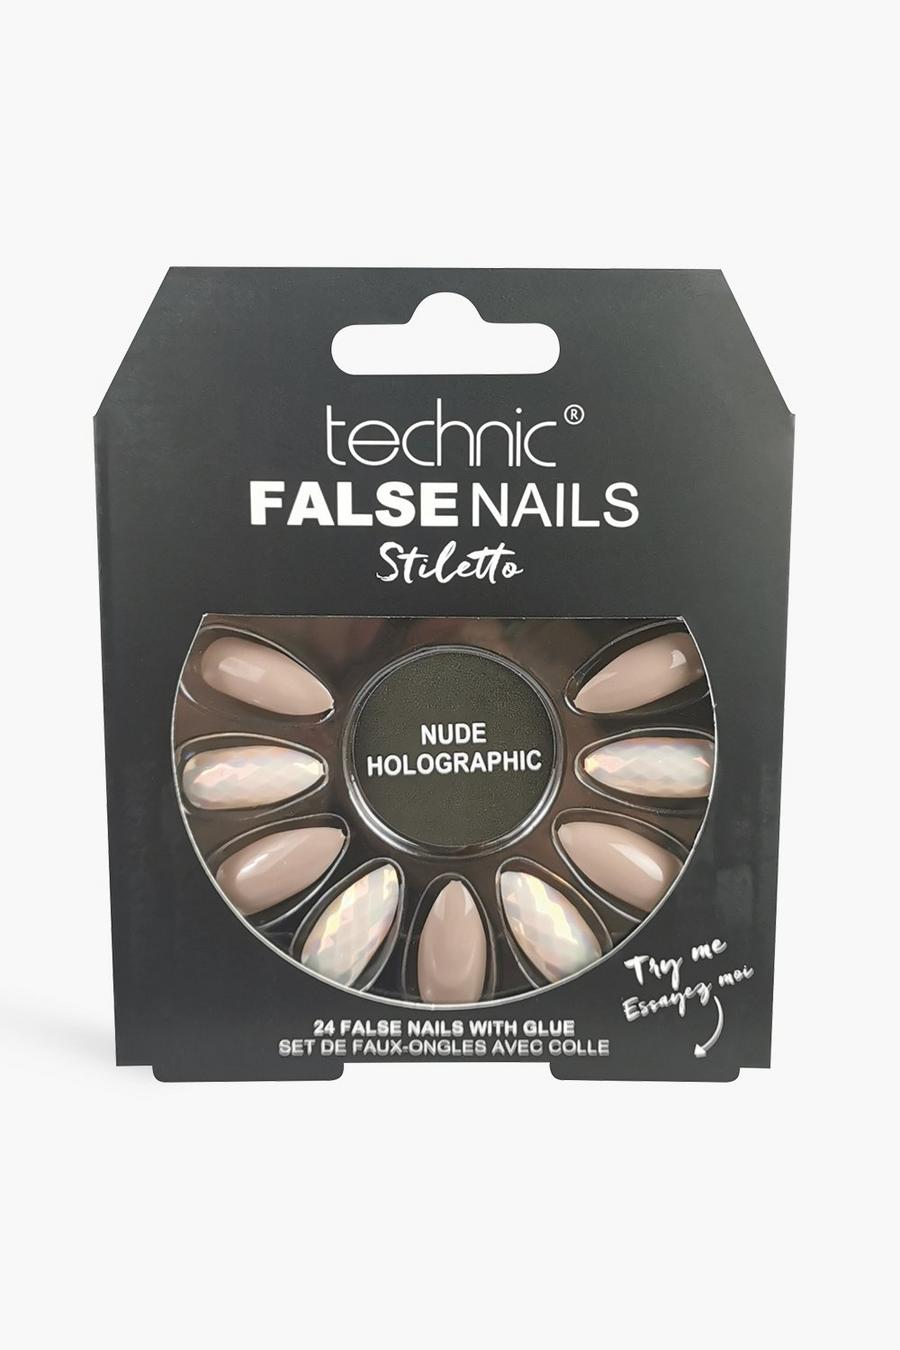 Technic False Nails - Faux ongles - Nude Holographic, Couleur chair nude image number 1